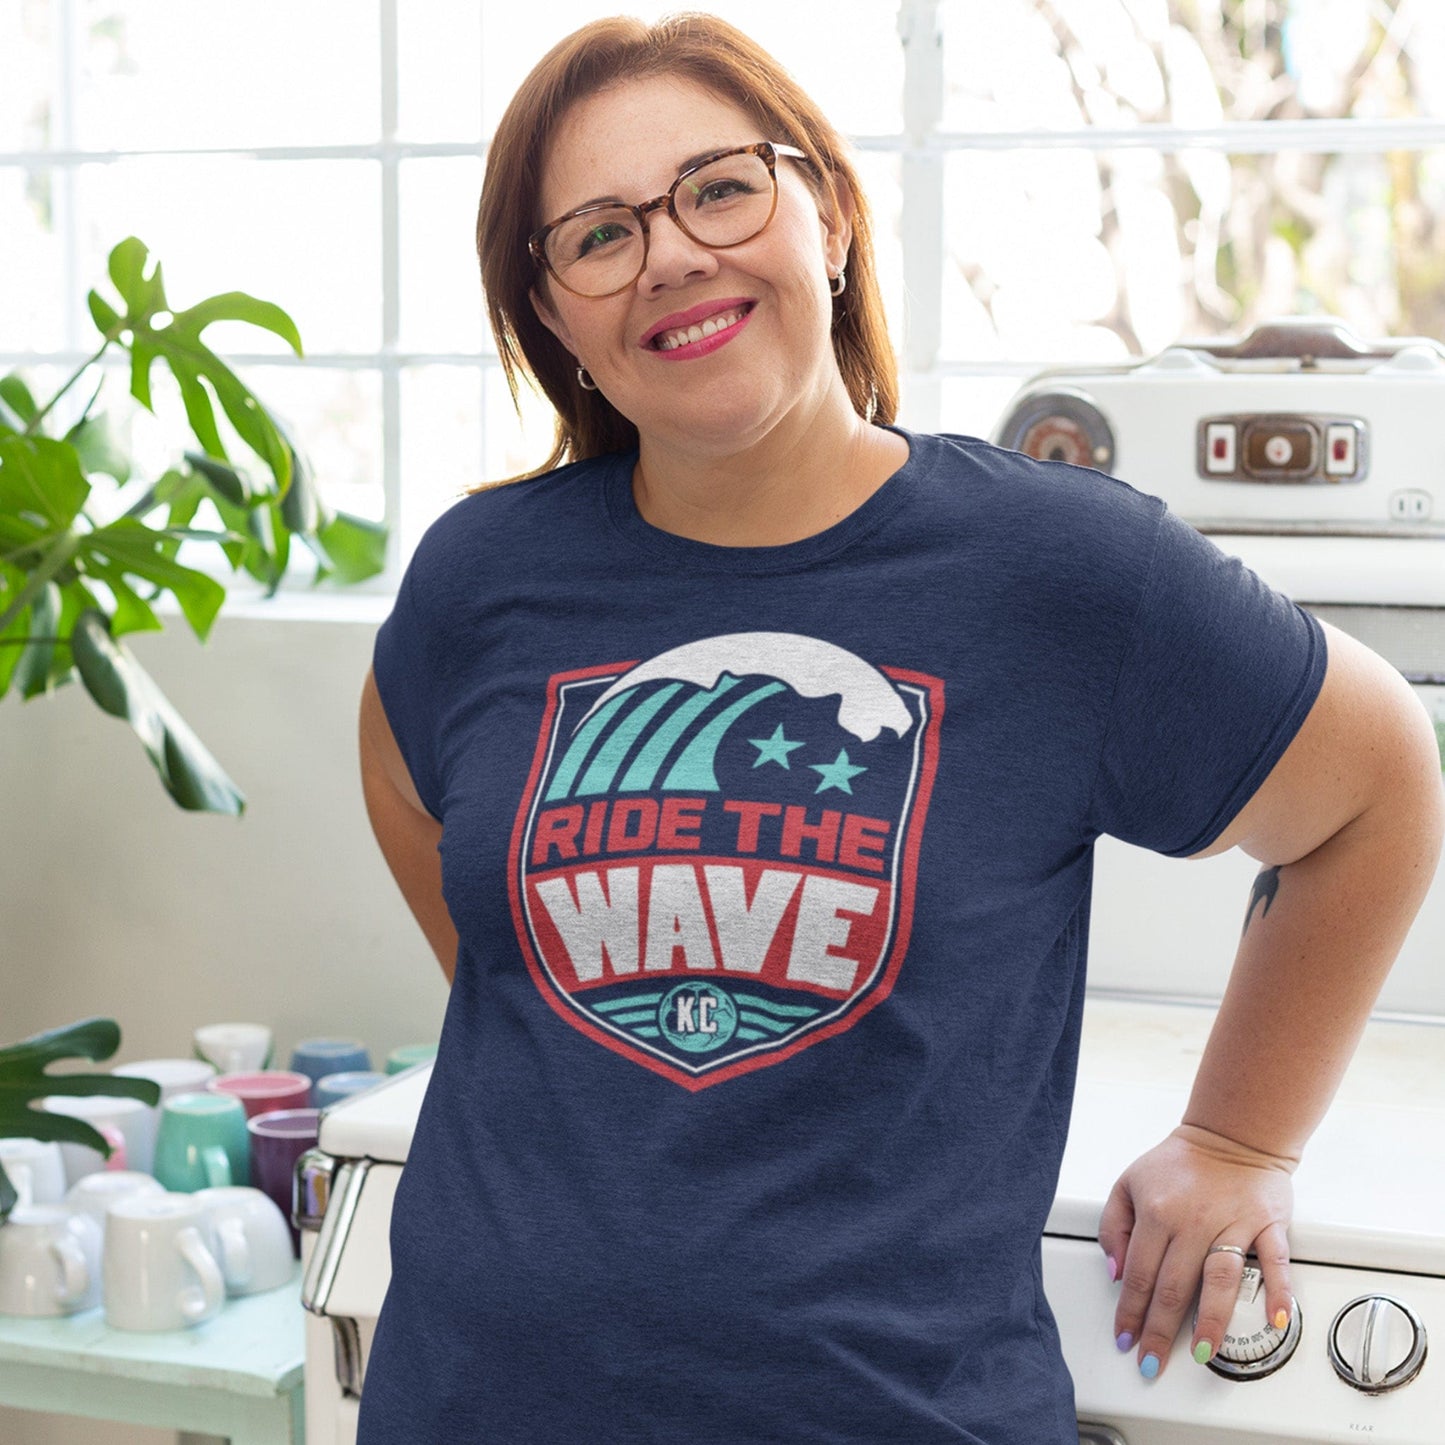 KC Swag Kansas City Current RIDE THE WAVE on heather navy unisex t-shirt worn by female model leaning on stove in bright kitchen